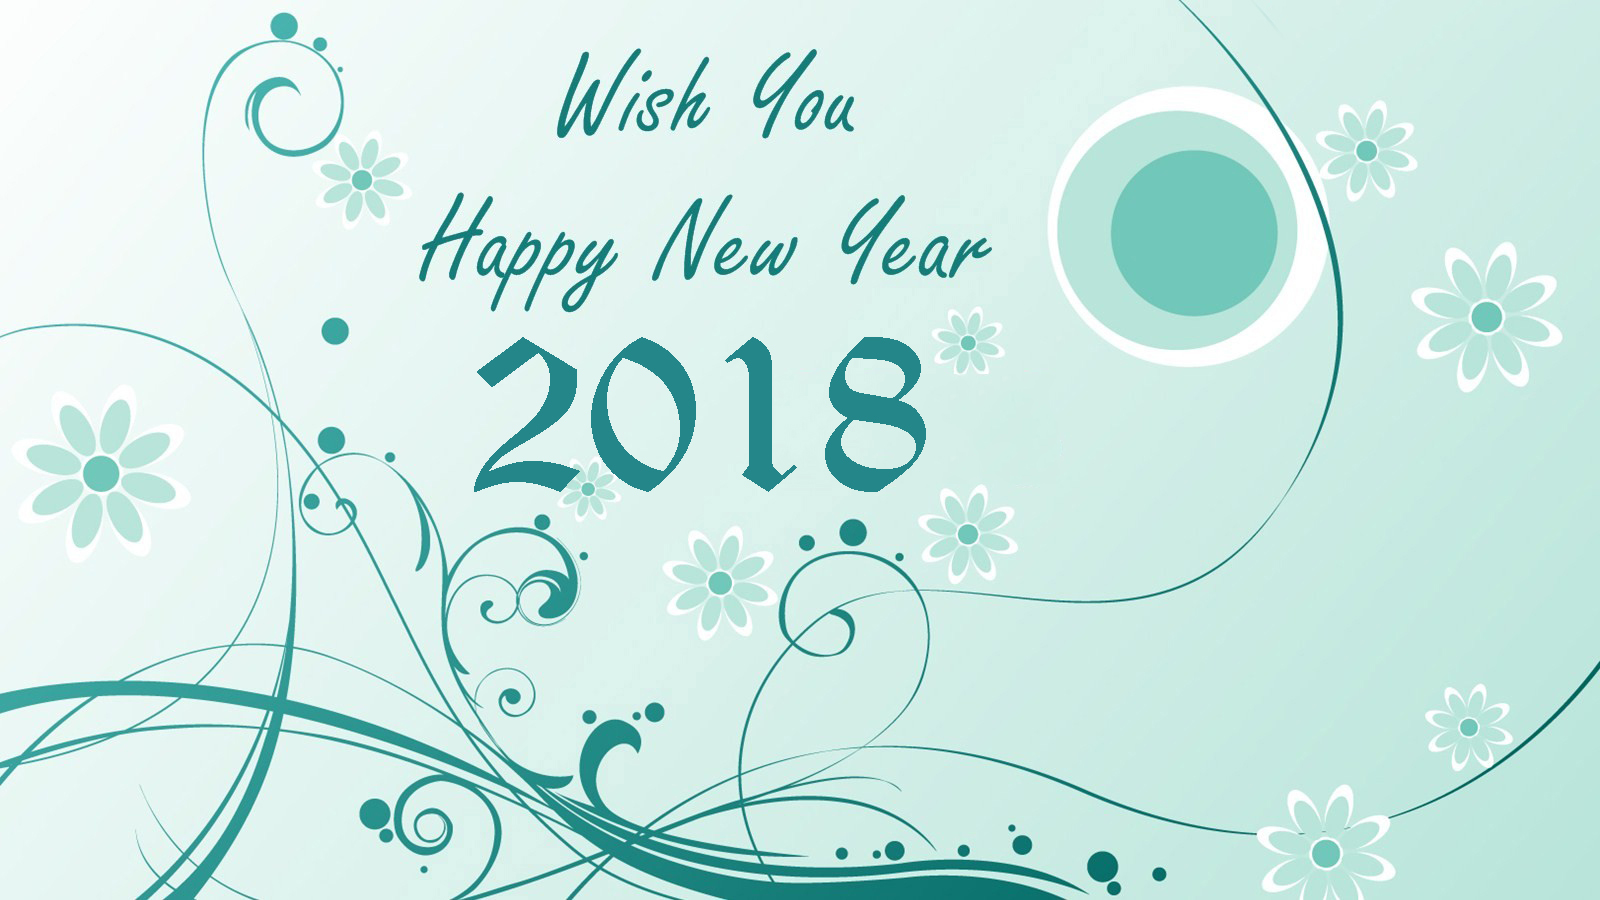 Happy New Year 2018 Sms Greeting Hd Wallpapers